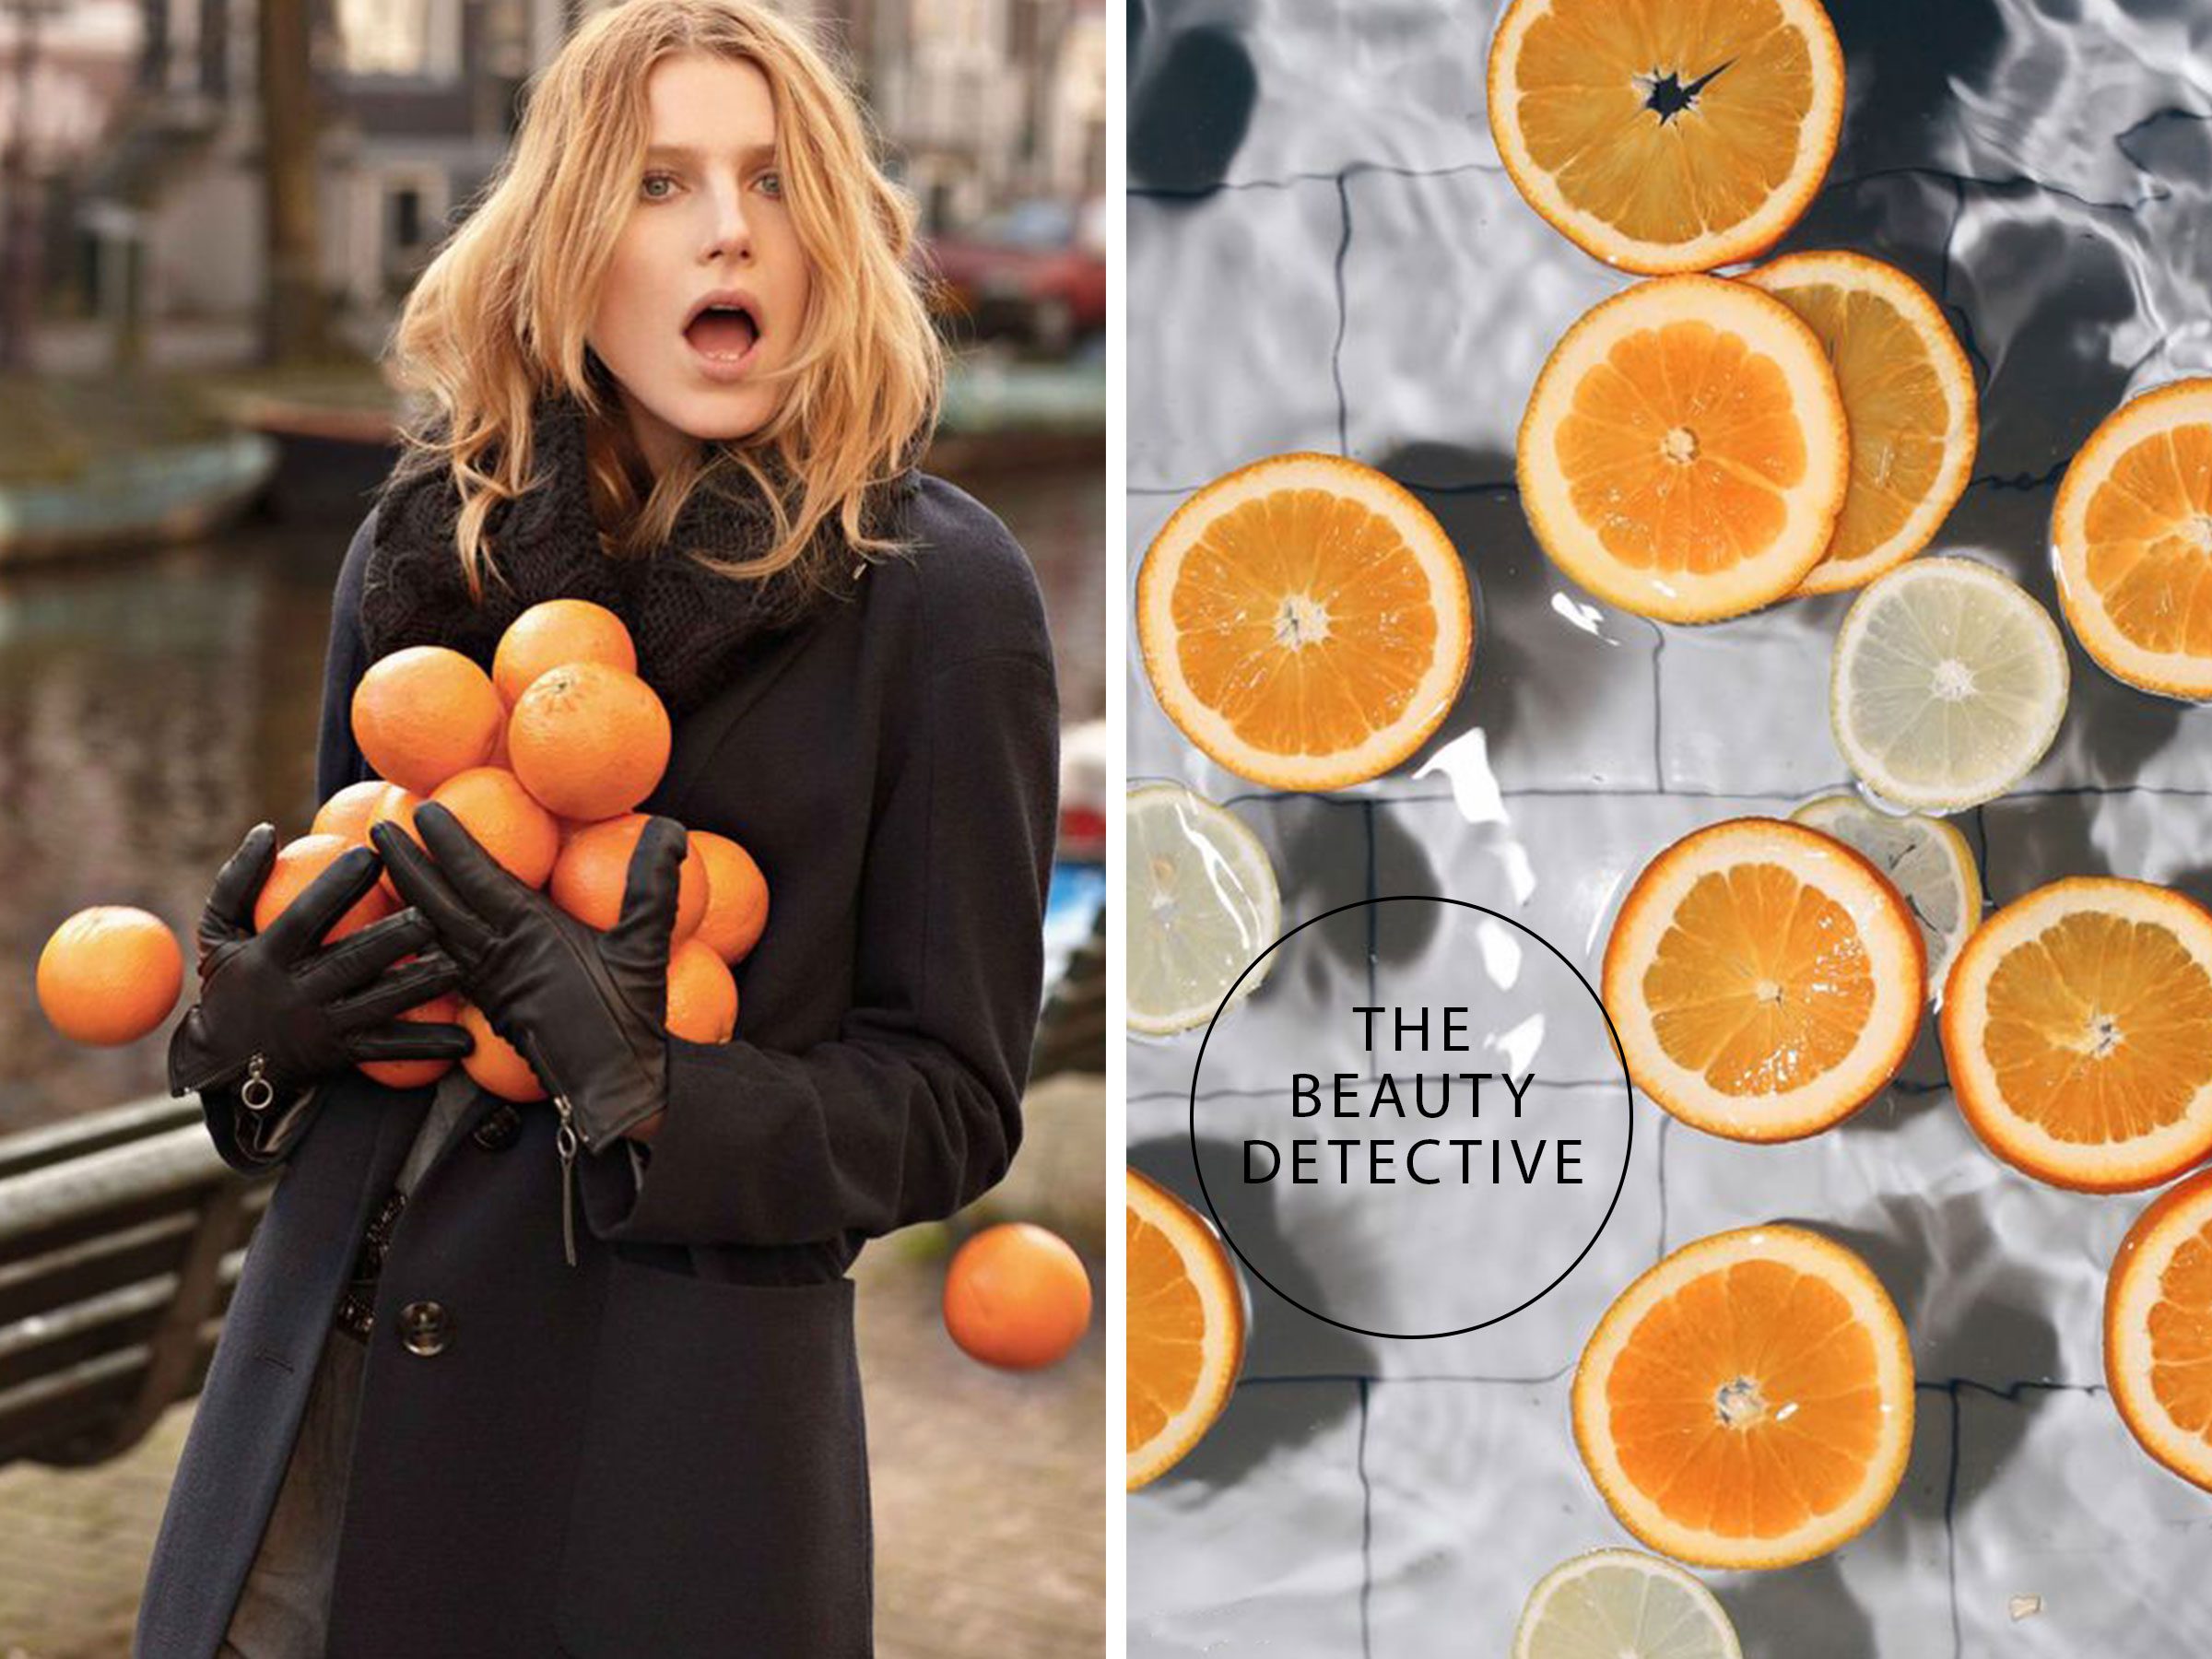 The Beauty Detective: Have You Had Your Vitamin C"